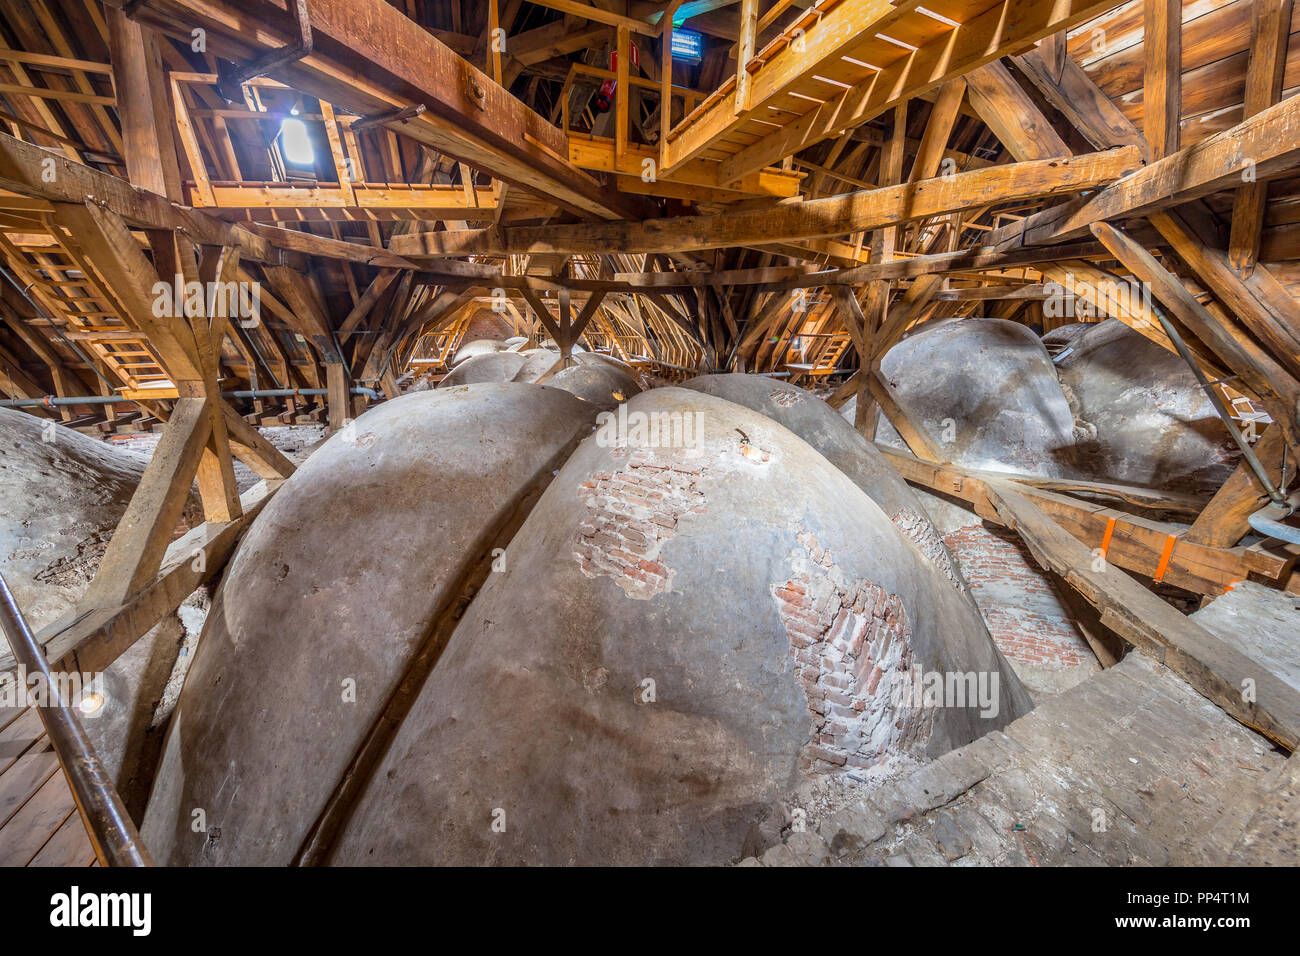 GRONINGEN, NETHERLANDS - DECEMBER 12, 2016: Arches in ceiling from Attic of an old church with domed ceiling from the 16th century in the Netherlands Stock Photo